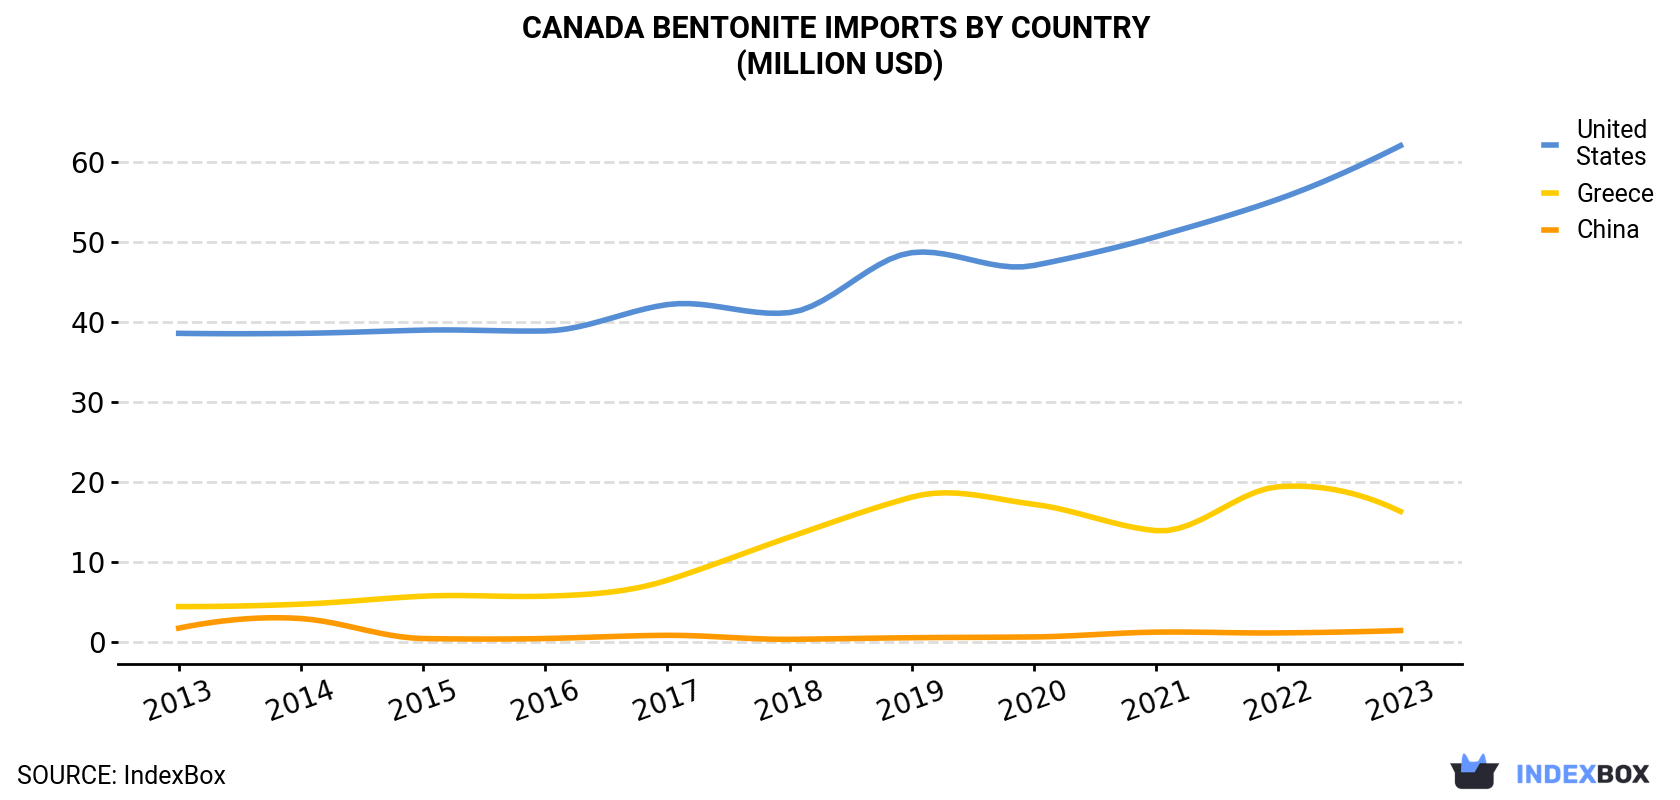 Canada Bentonite Imports By Country (Million USD)